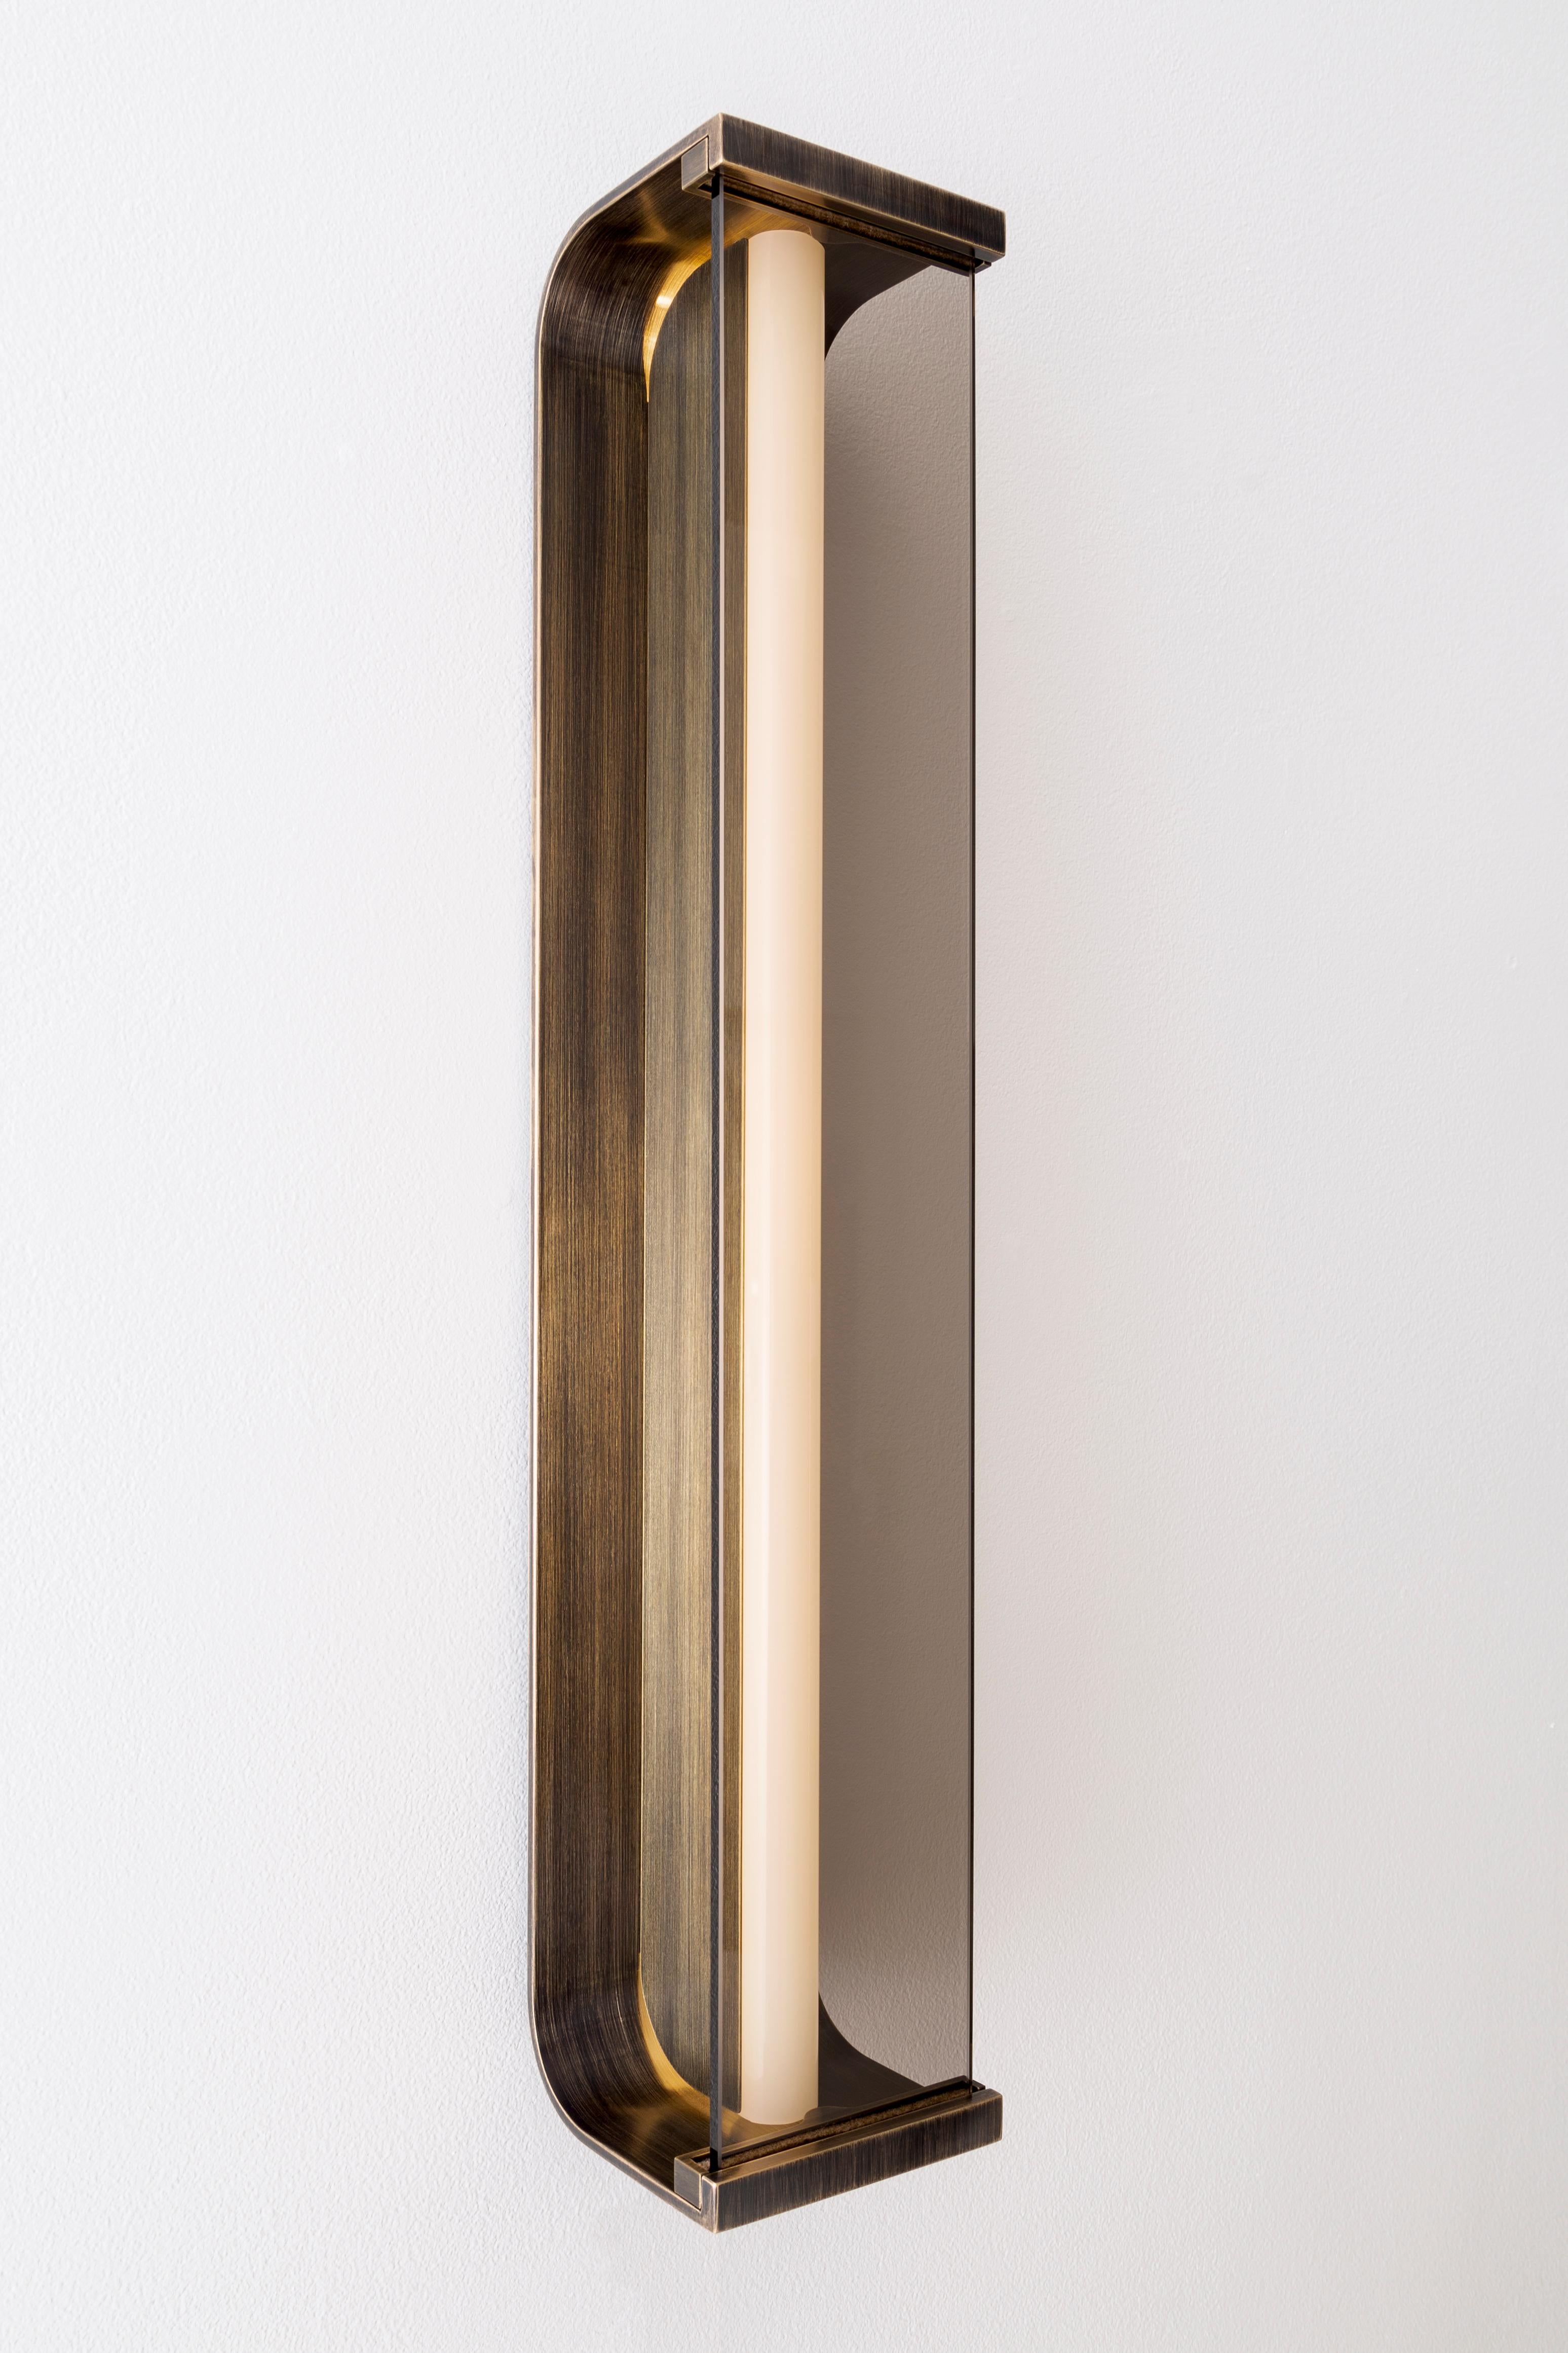 Spacek wall sconce features a minimal forged brass body that supports a linear glass lens. Light filters through bronze, smoke, or starphire glass. Fixture body is available in satin brass, antique brass or blackened Brass to coordinate with a range